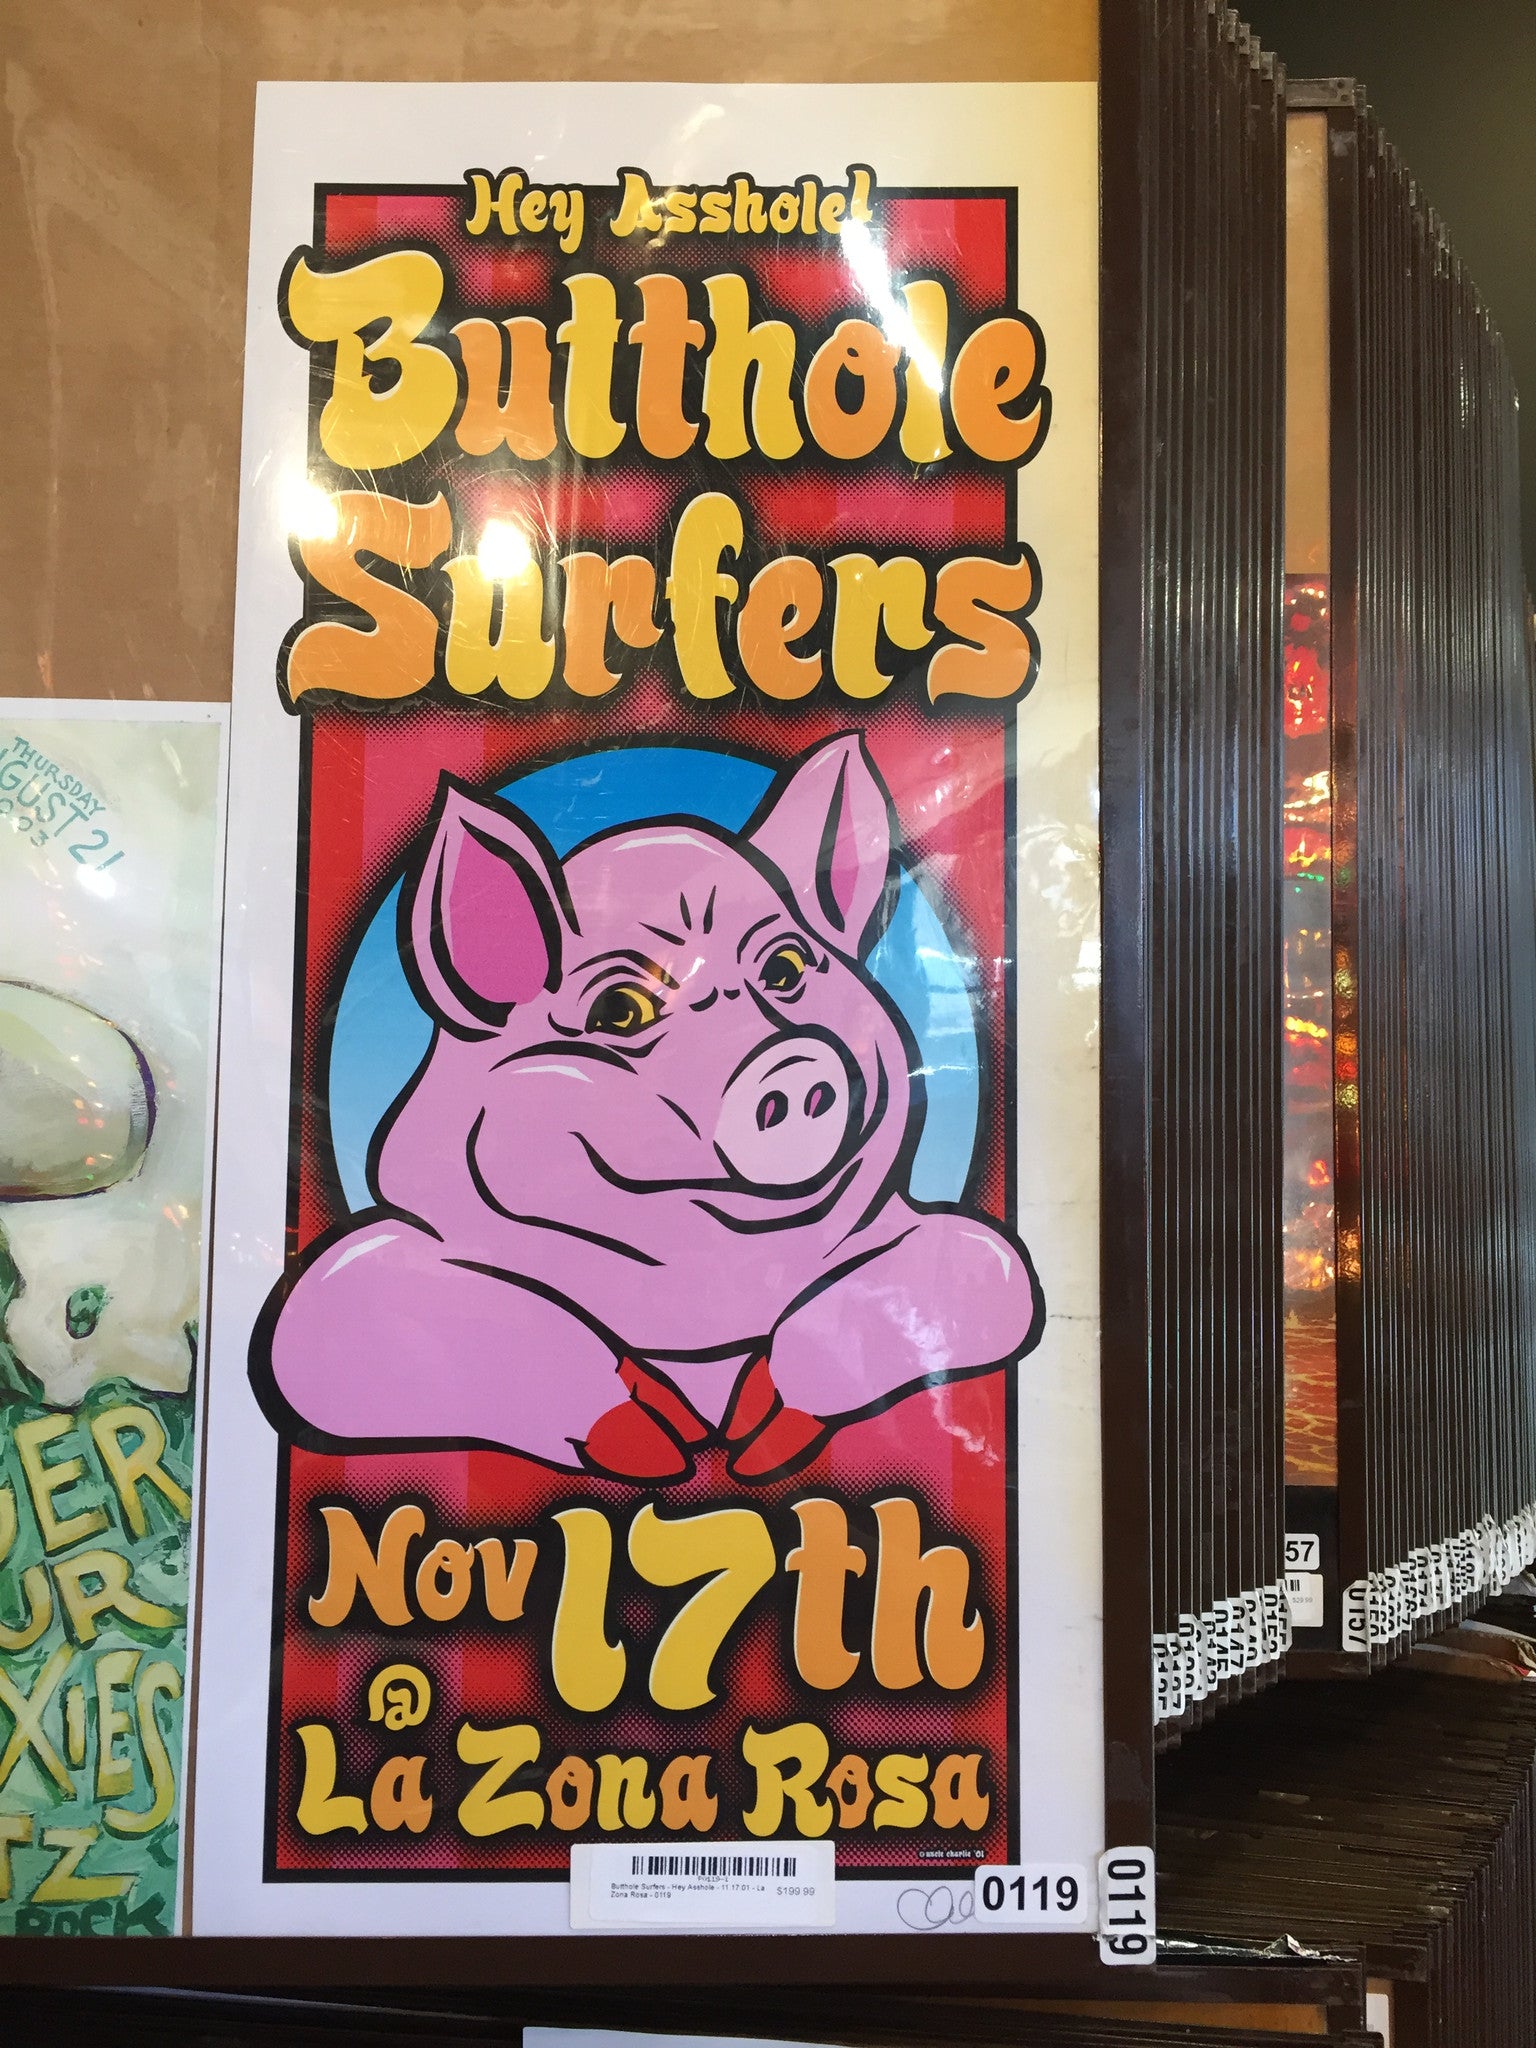 Butthole Surfers - Hey Asshole - 11" x 26" Promo Poster p0119-1